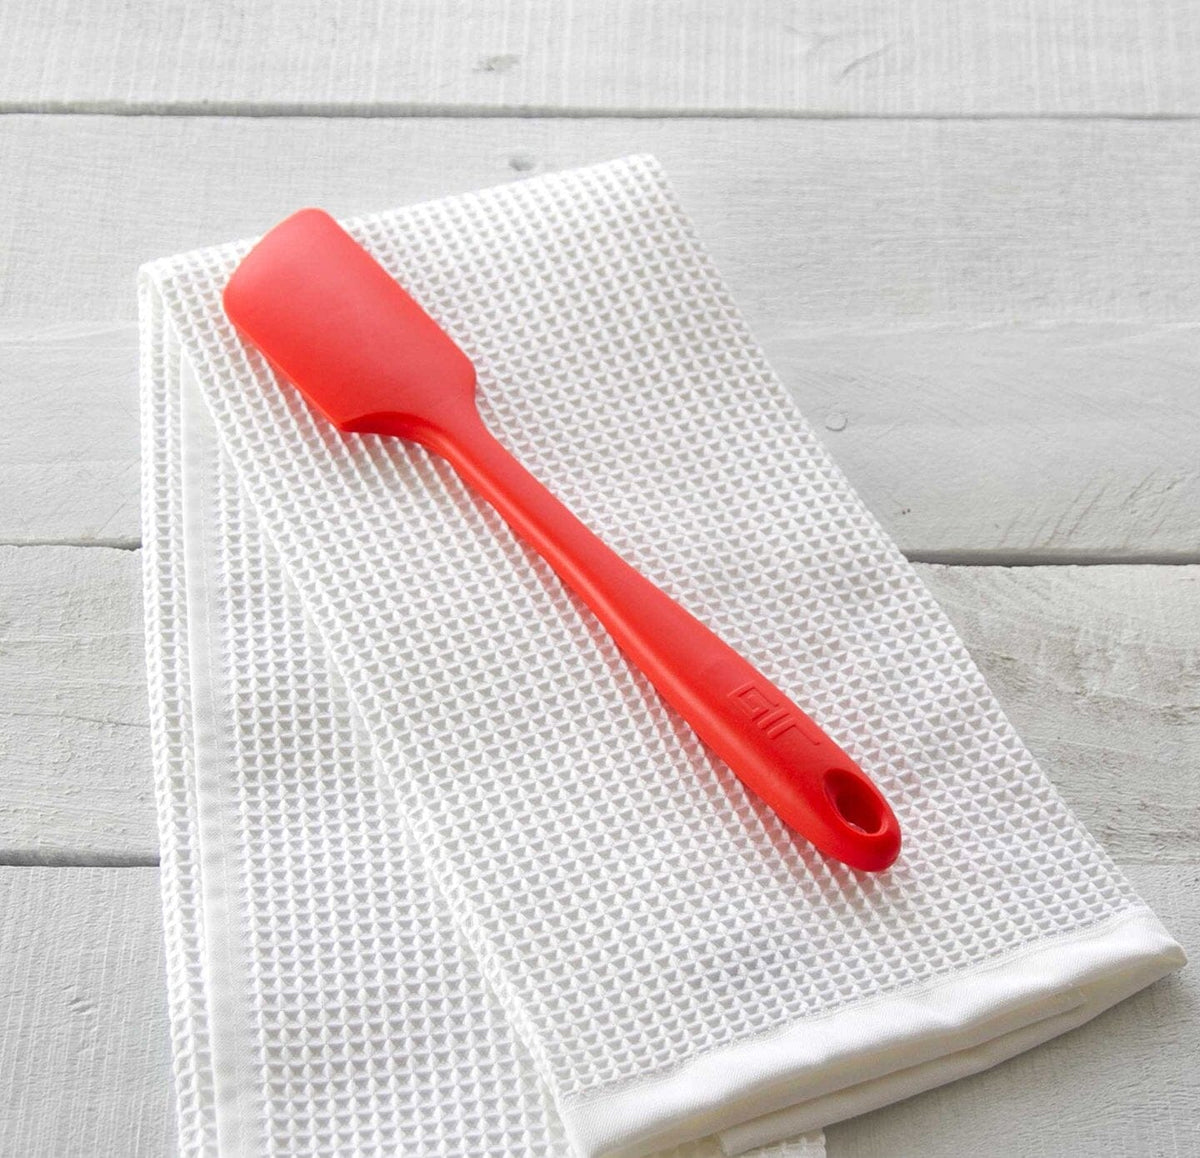 GIR: Get It Right, Food-Safe, Scratch-Proof, Professional-Grade Silicone Spatulas, - Placewares